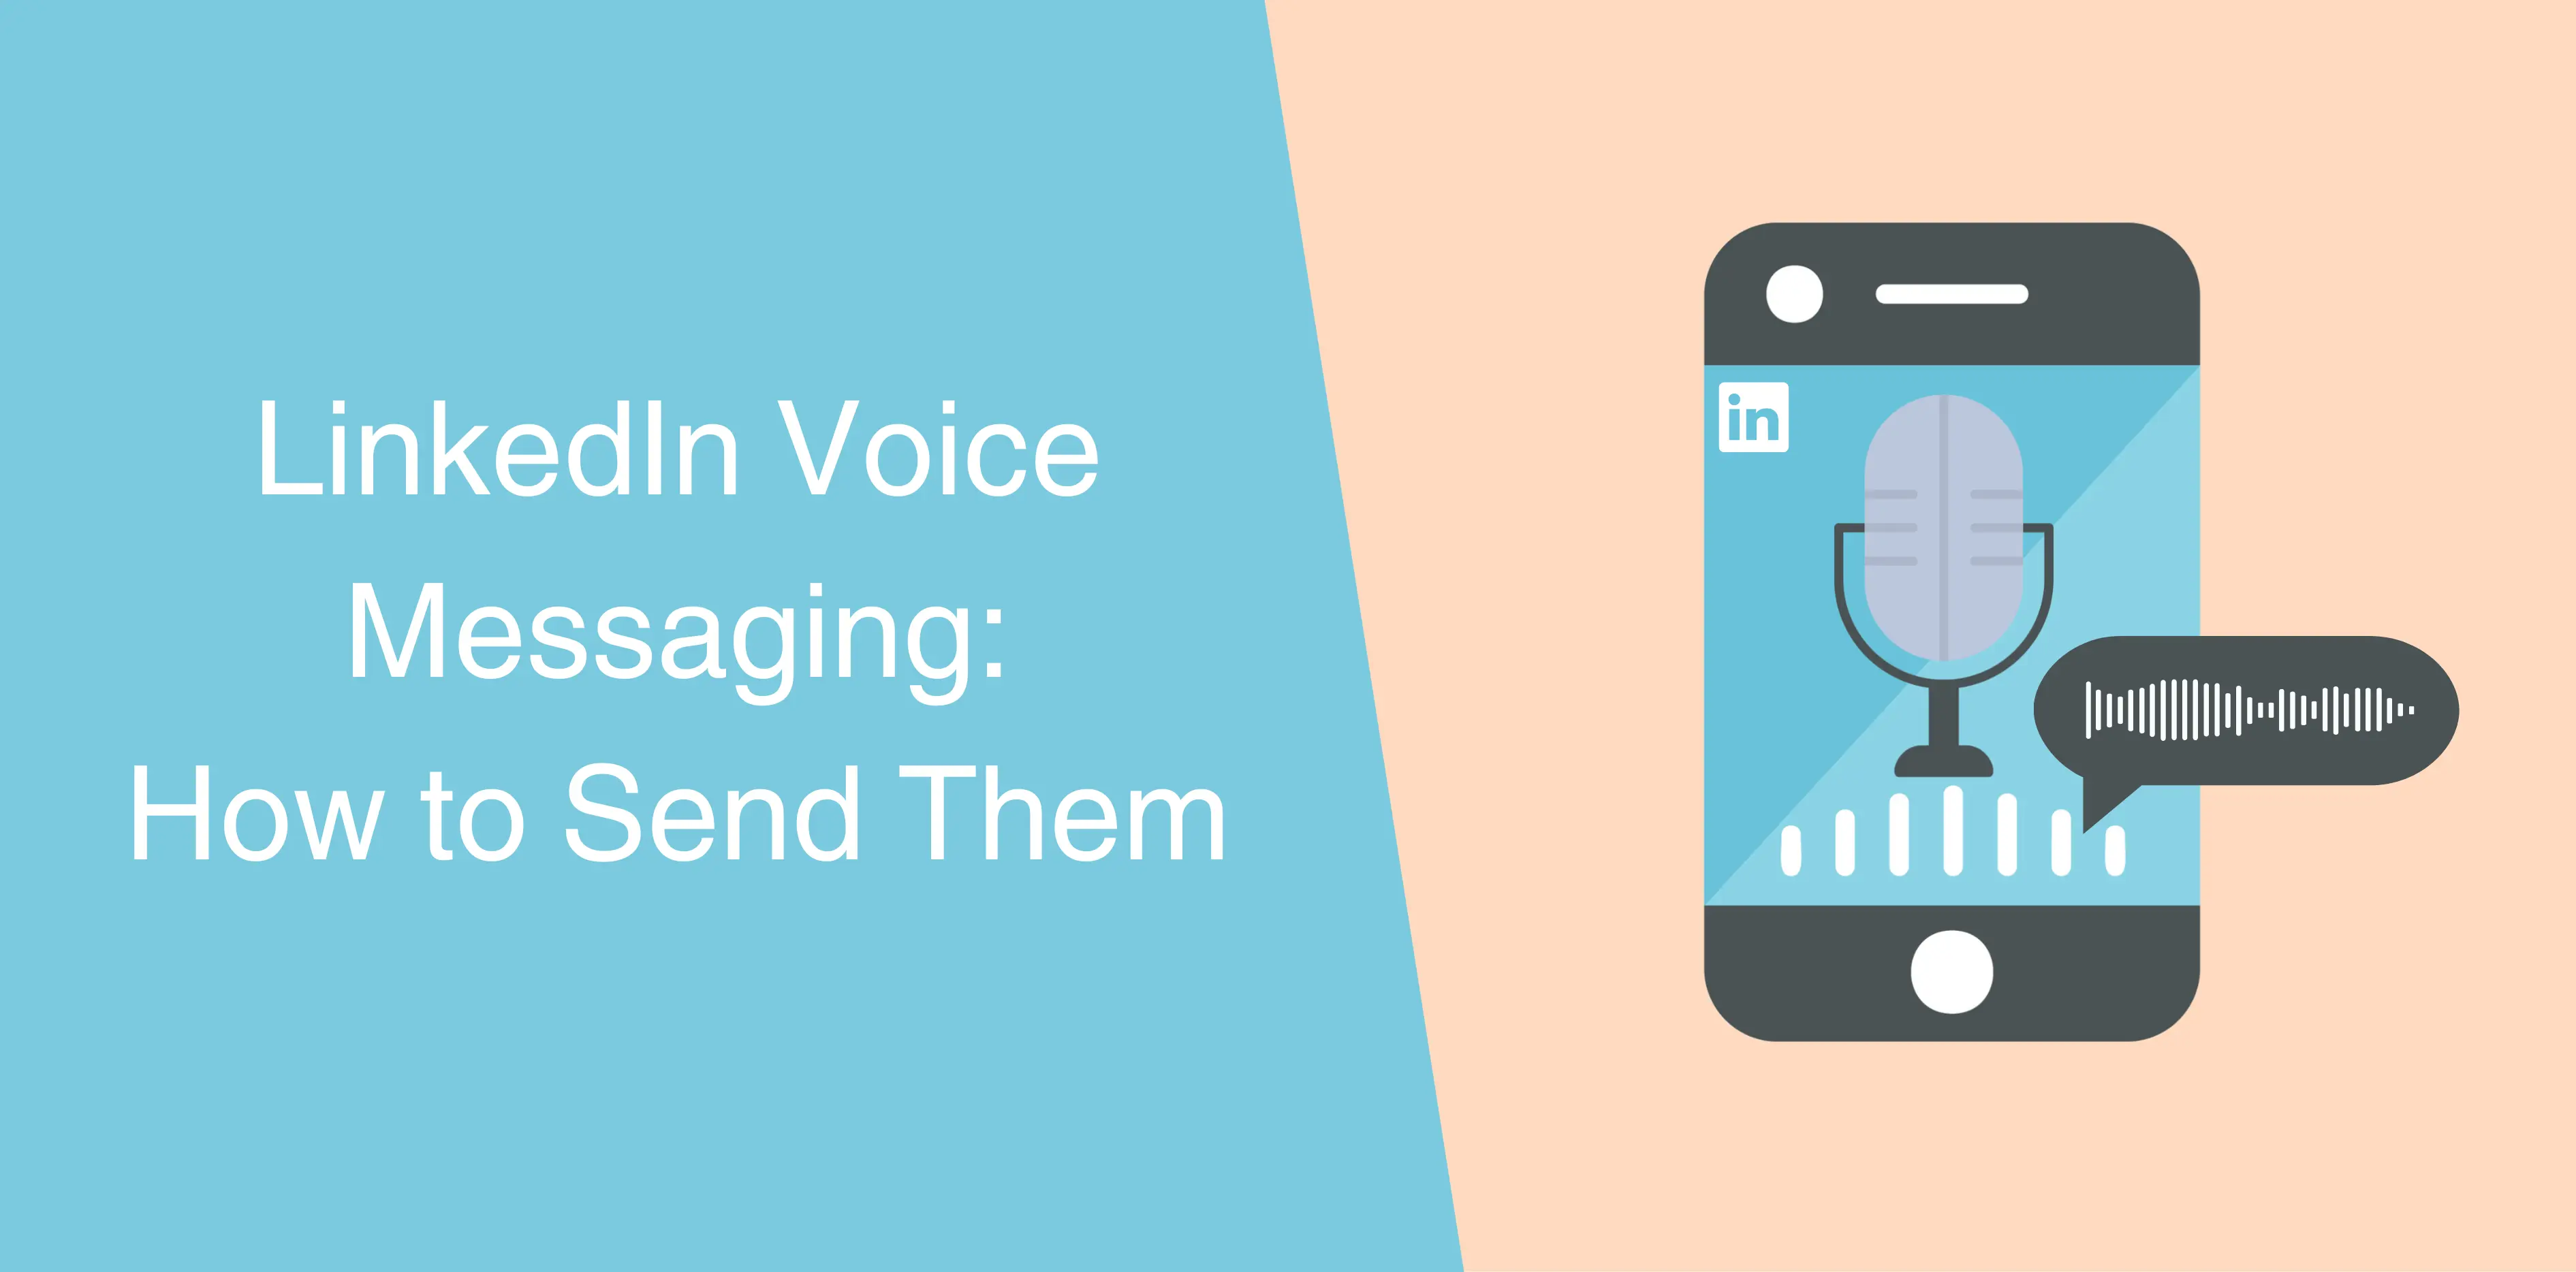 LinkedIn Voice Messaging: How to Send Them